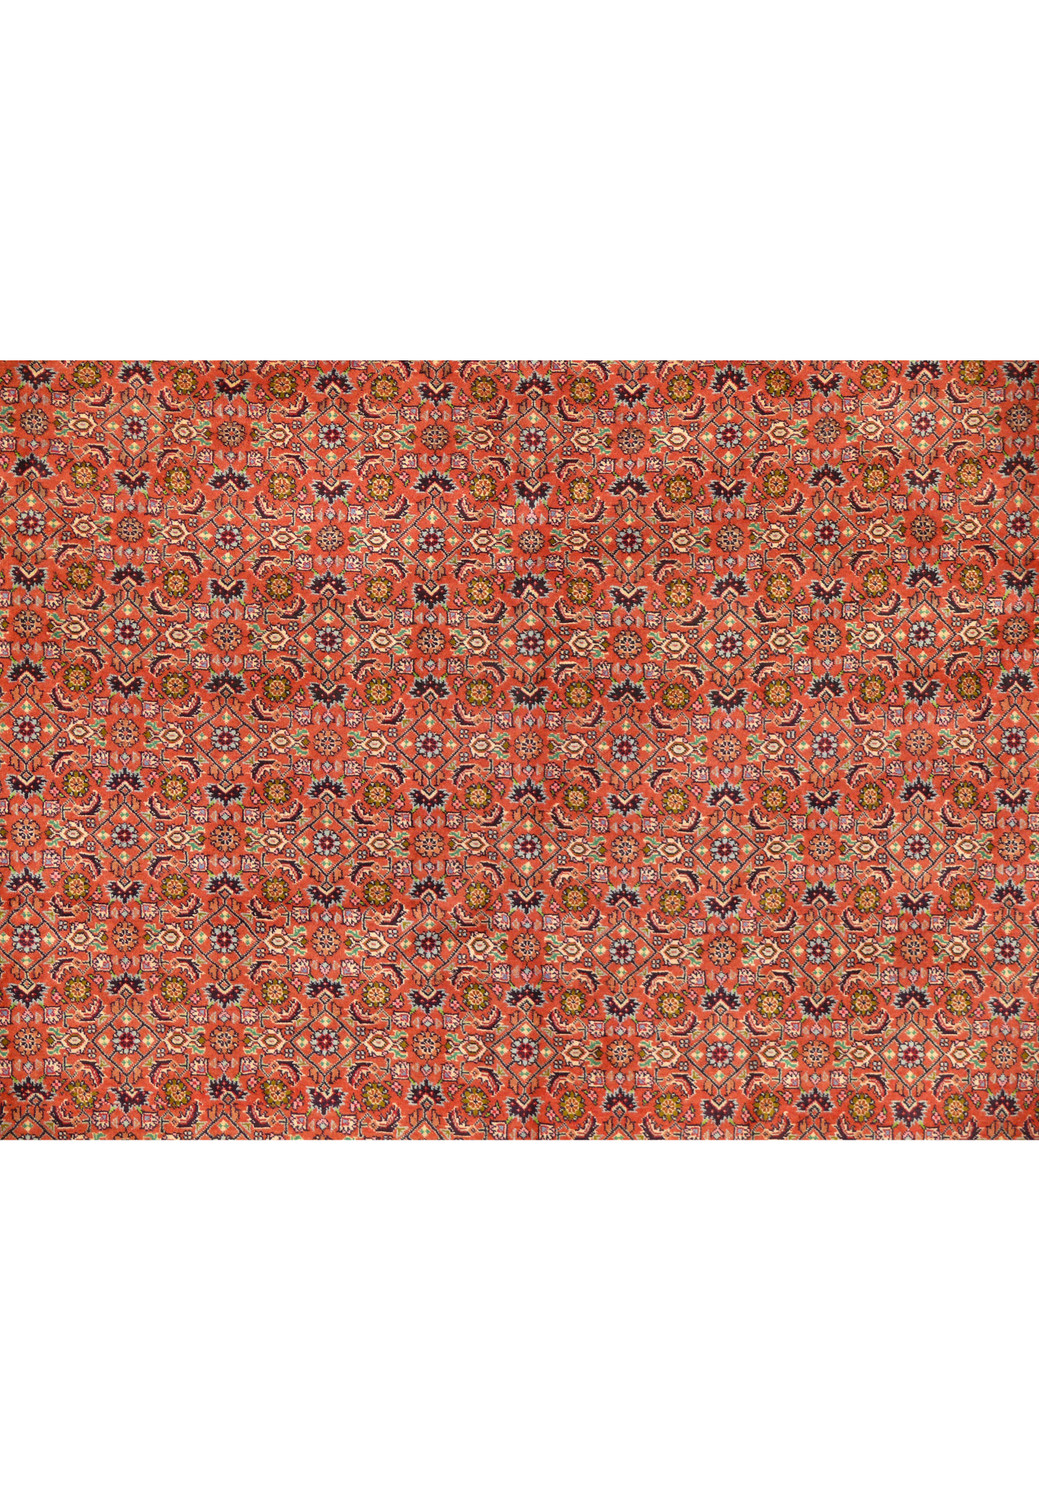 Zoomed into the all over design patterns, of this 8x11 Persian Bidjar Rug